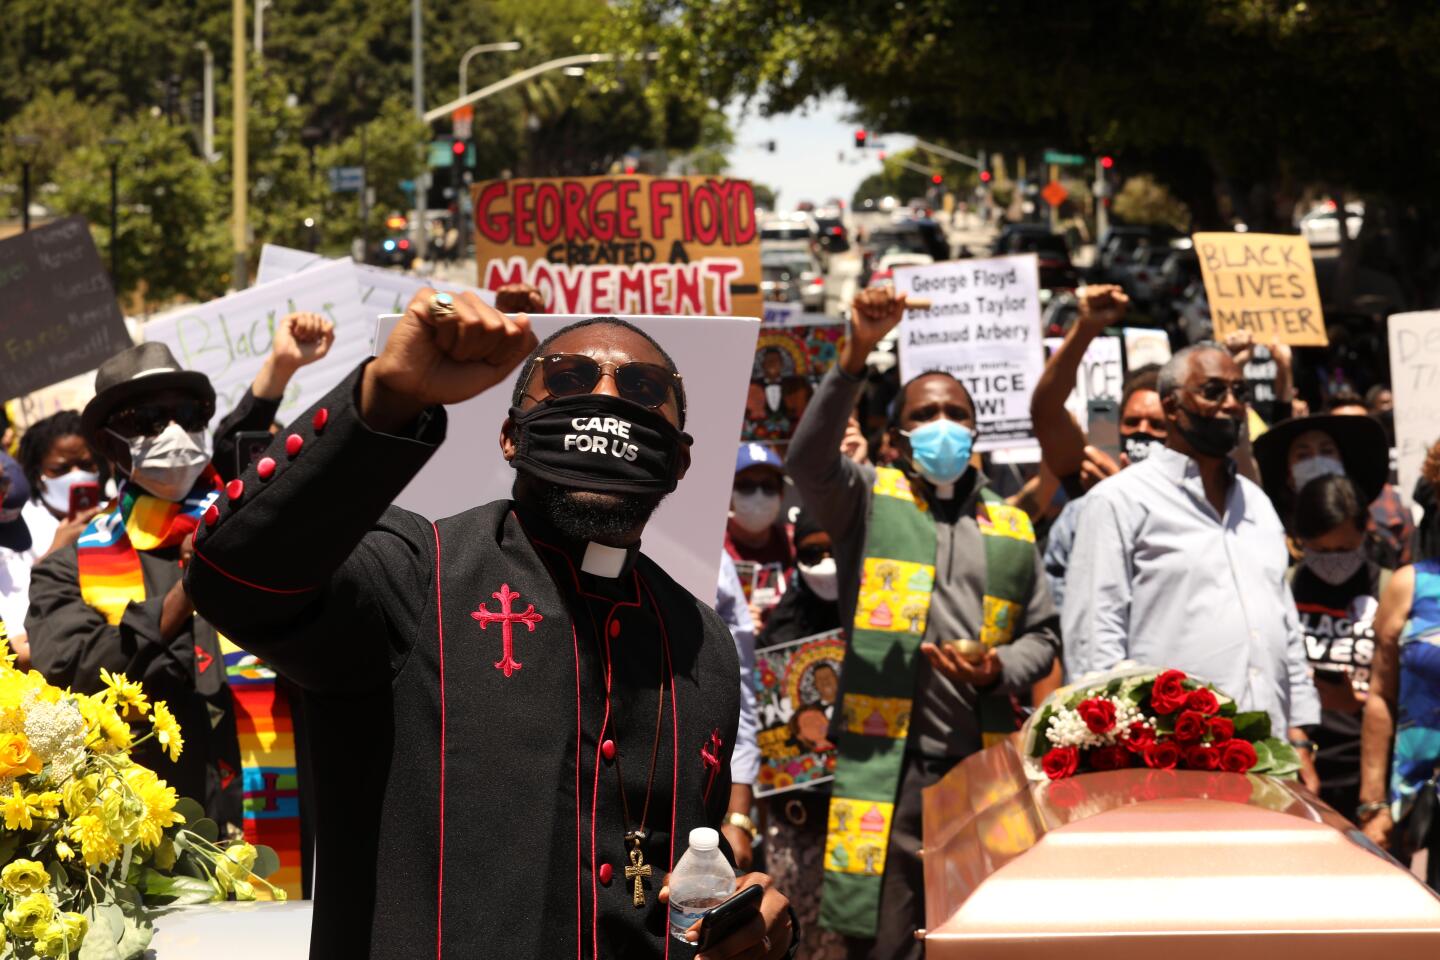 Pastor Eddie Anderson, foreground, joins hundreds at a funeral procession memorial service and to honor George Floyd in Downtown Los Angeles.